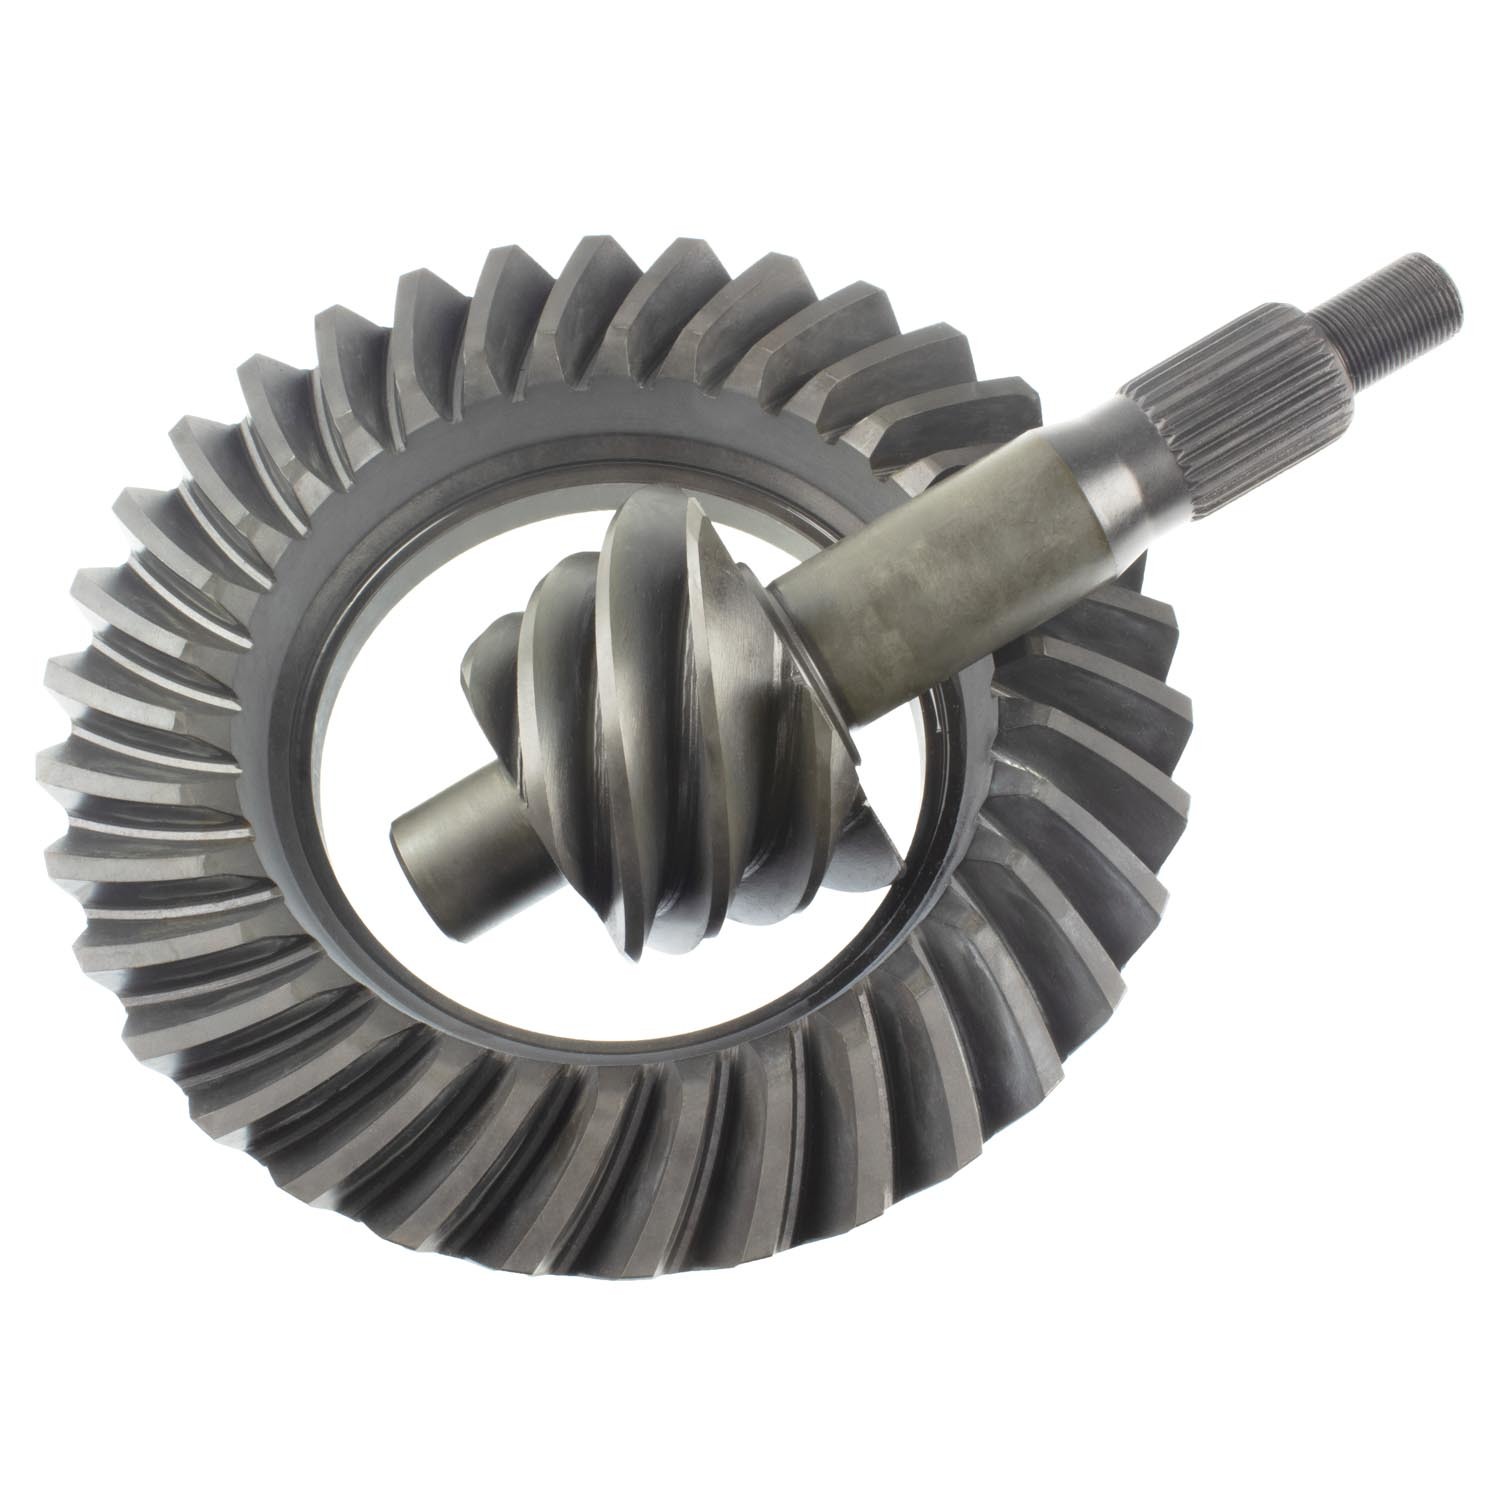 Richmond Gear F9567 - Ring and Pinion, Excel, 5.67 Ratio, 28 Spline Pinion, Ford 9 in, Kit